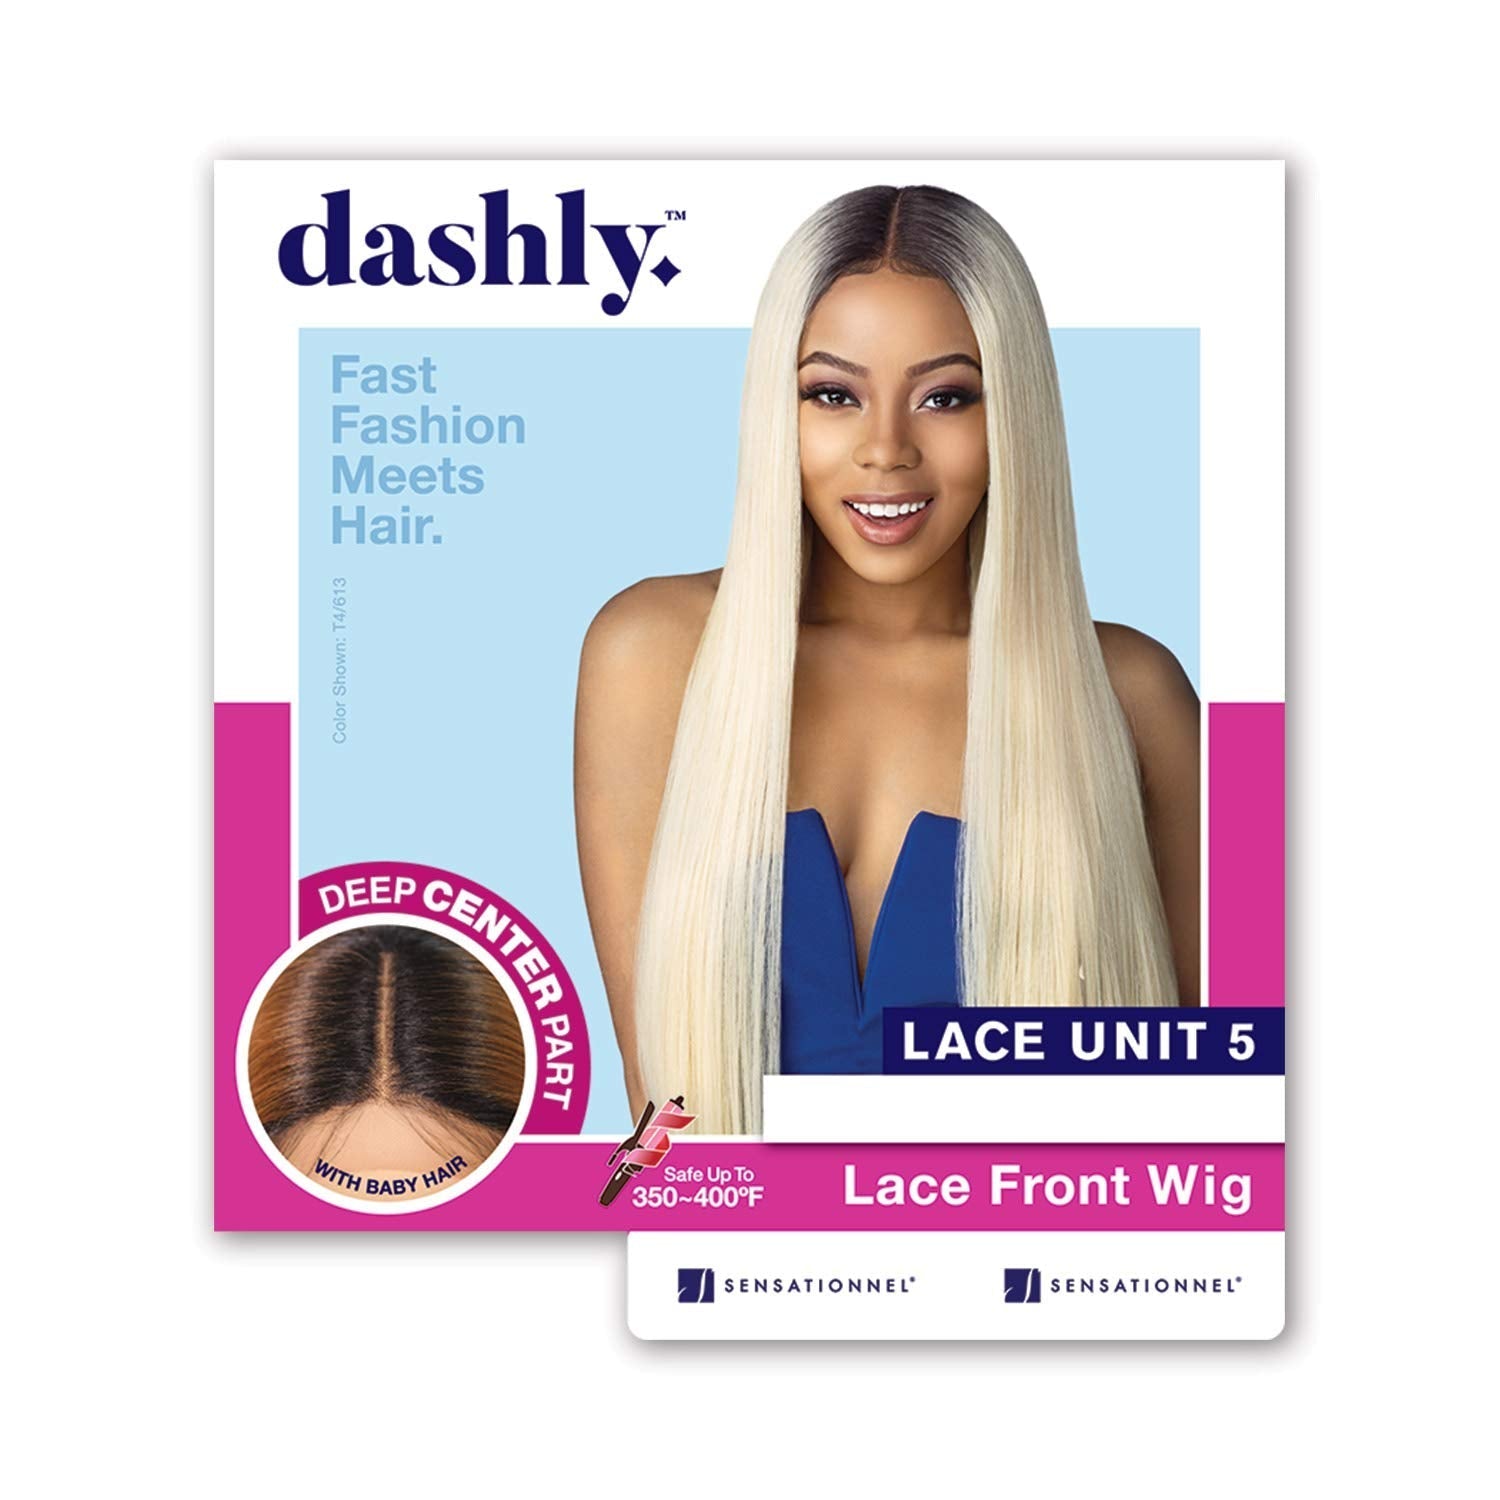 DASHLY Sensationnel lace front wig lace wig unit 5 (1B) Find Your New Look Today!